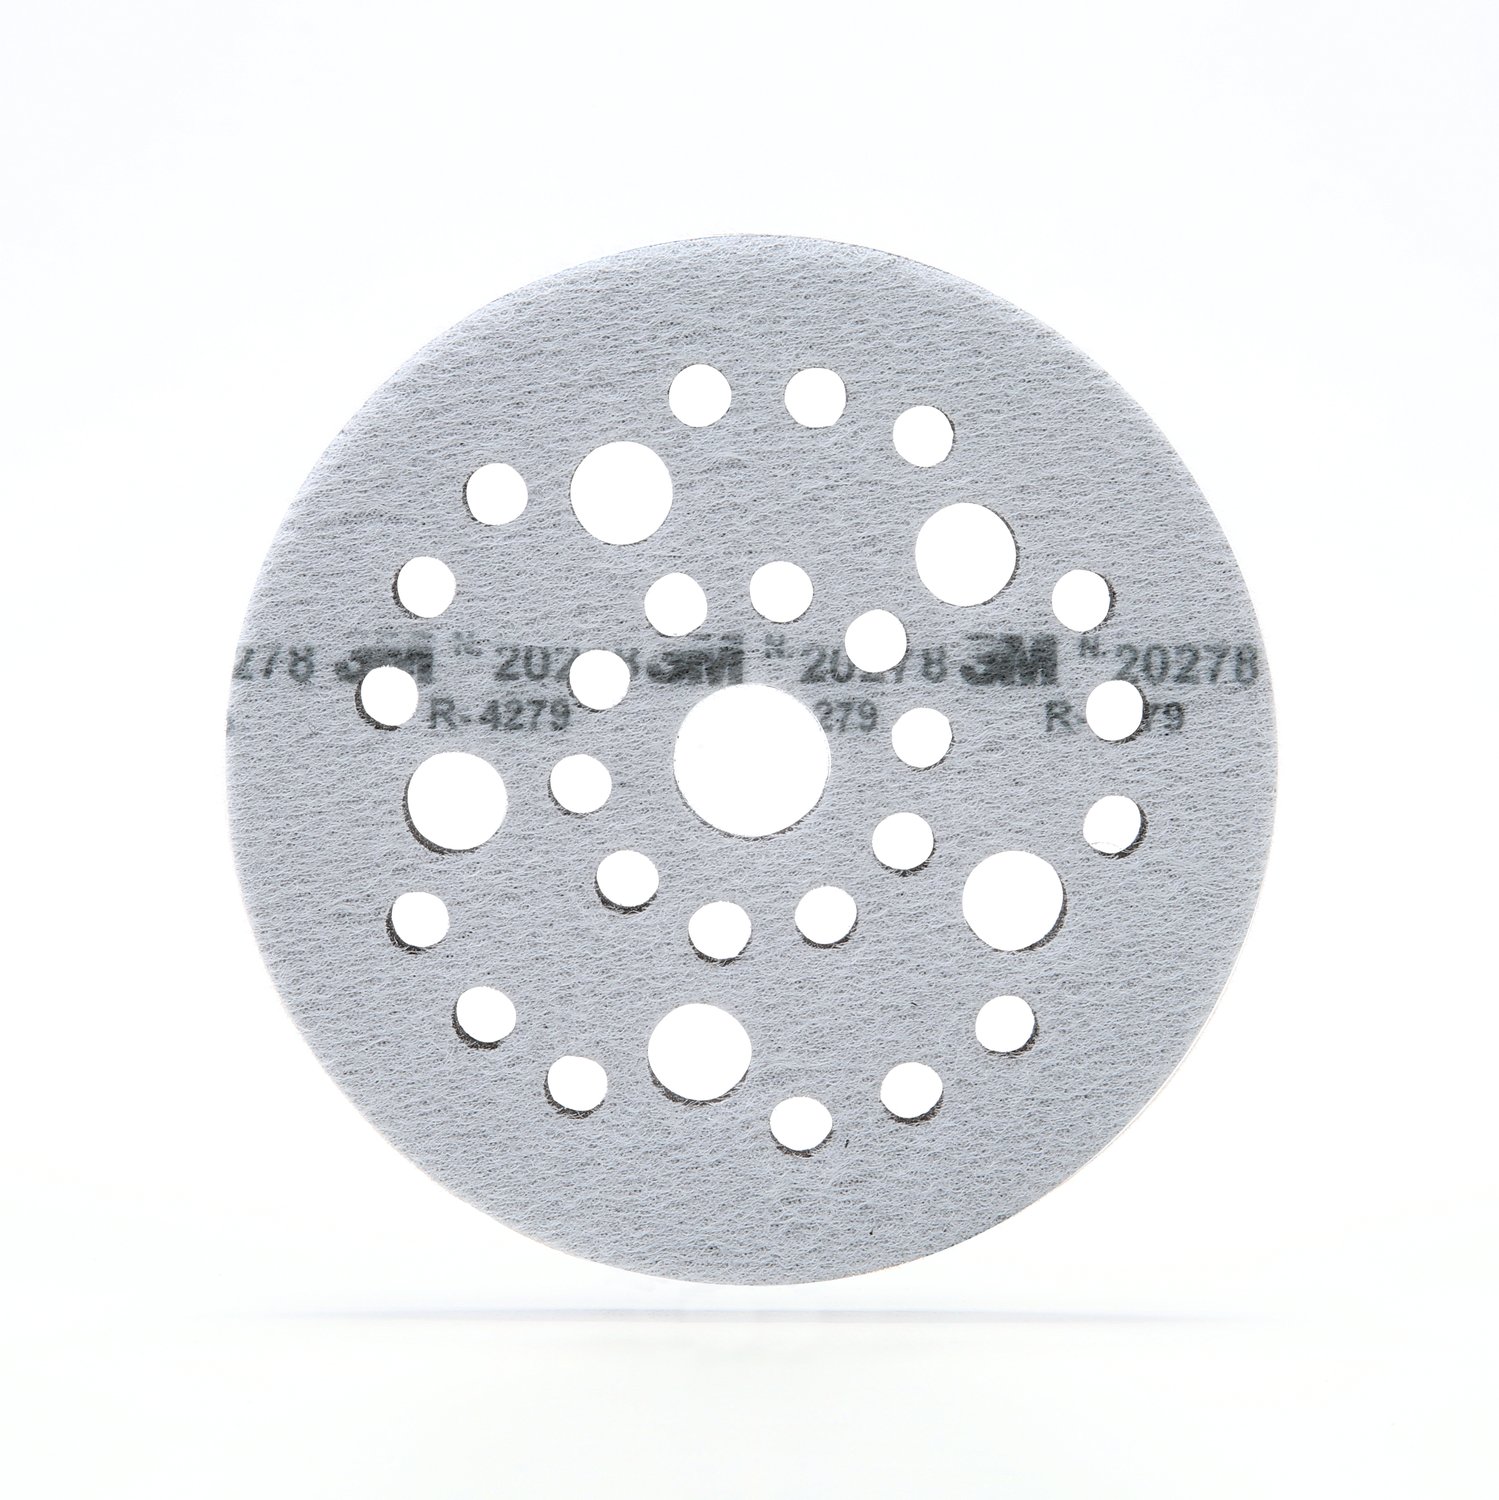 7100006170 - 3M Clean Sanding Soft Interface Disc Pad 20278, 5 in x 1/2 in x 3/4 in
Multihole, 10 ea/Case